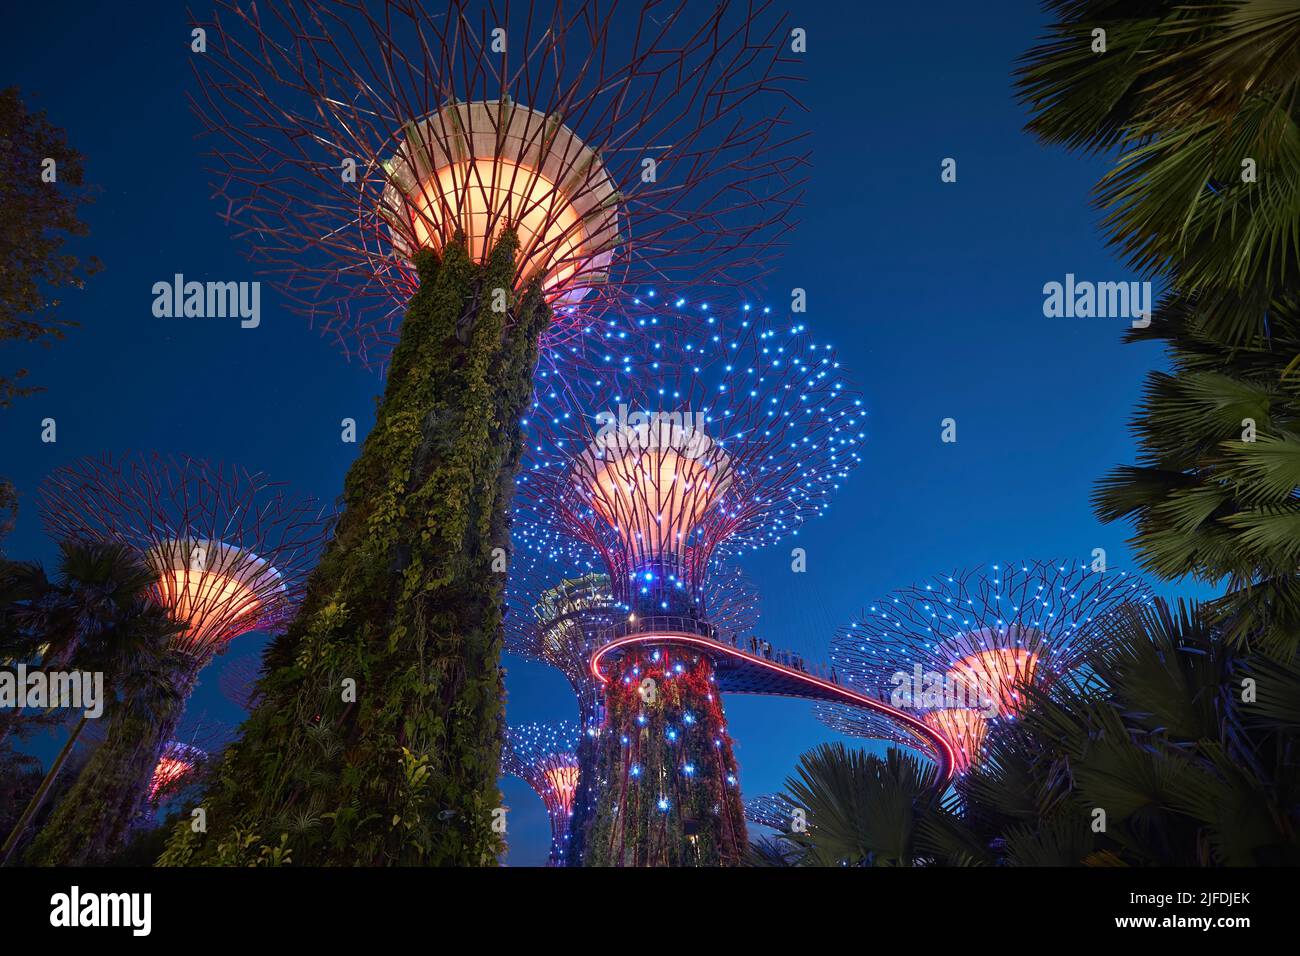 Singapore - June 26, 2022: Illuminated supertrees with skywalk during evening color light show in Gardens by the Bay in Singapore. Stock Photo